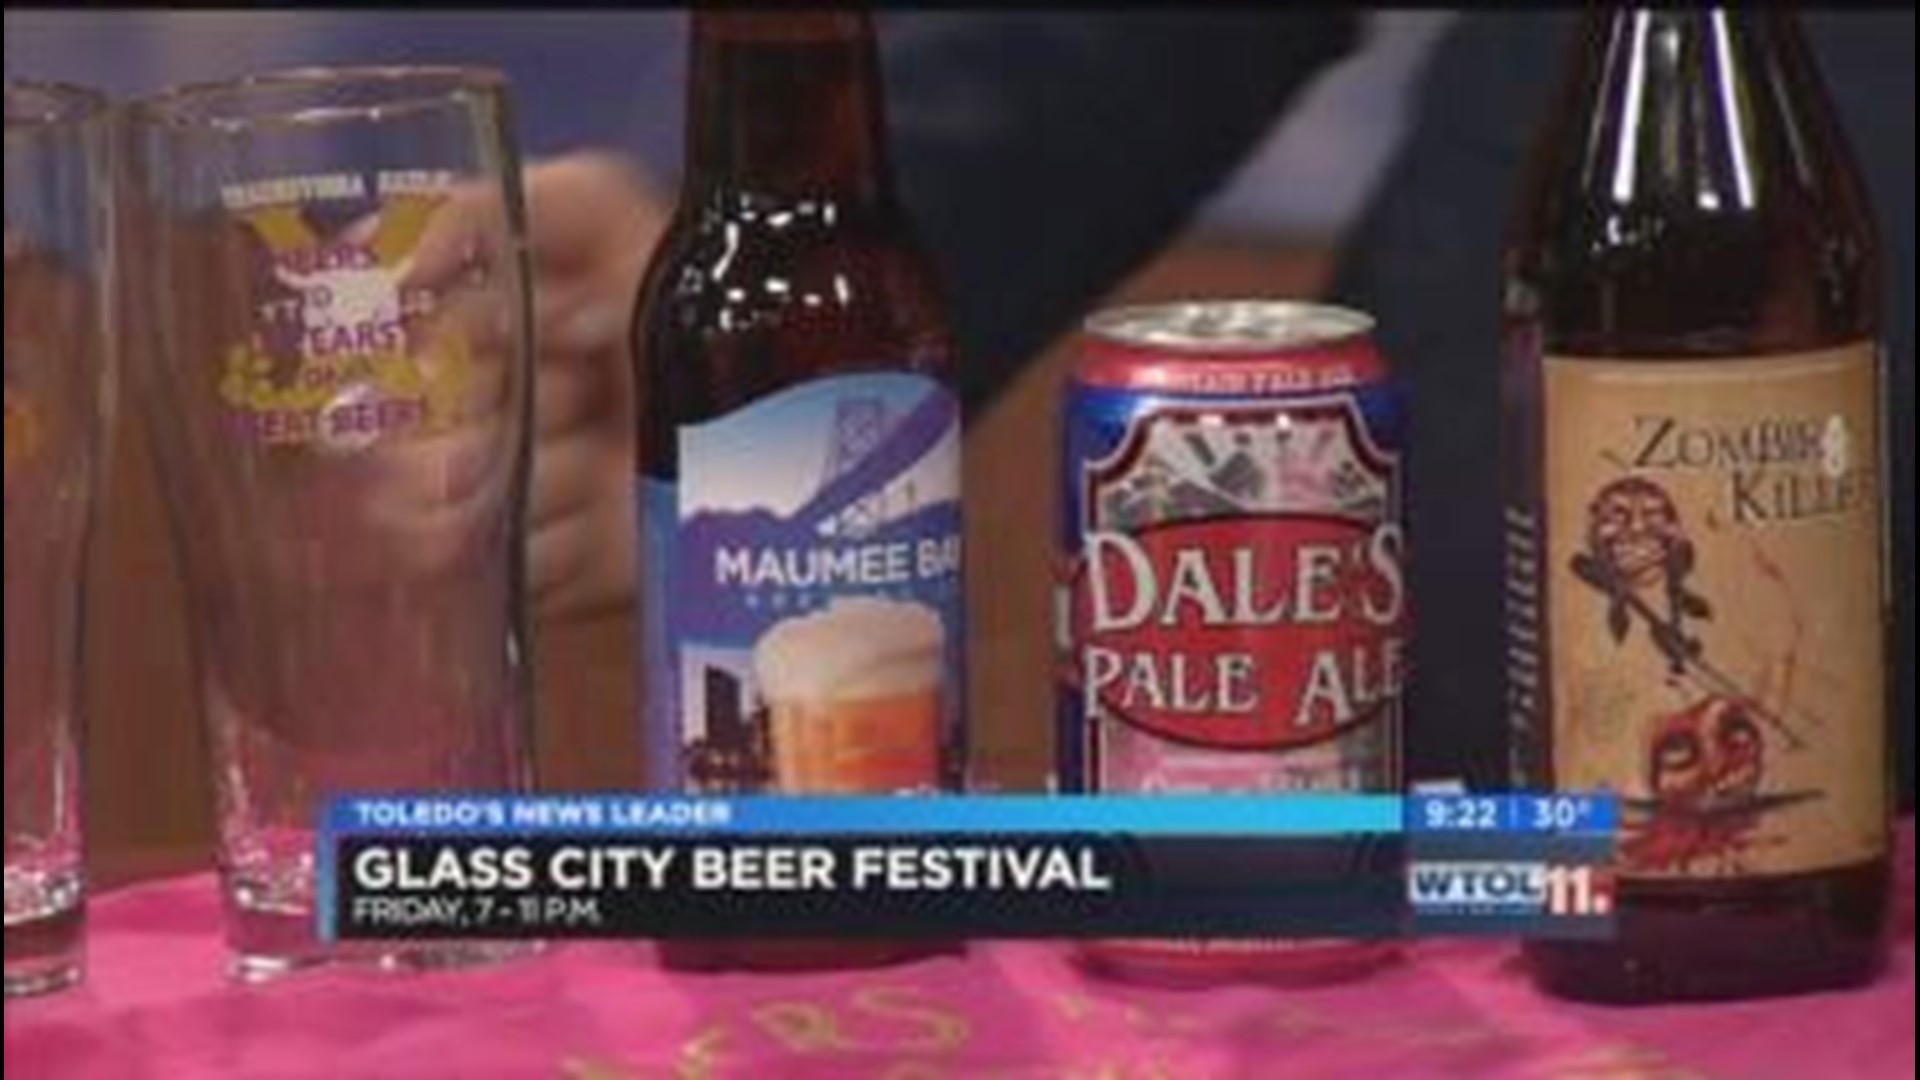 Glass City Beer Festival tonight at Lucas County Rec Center